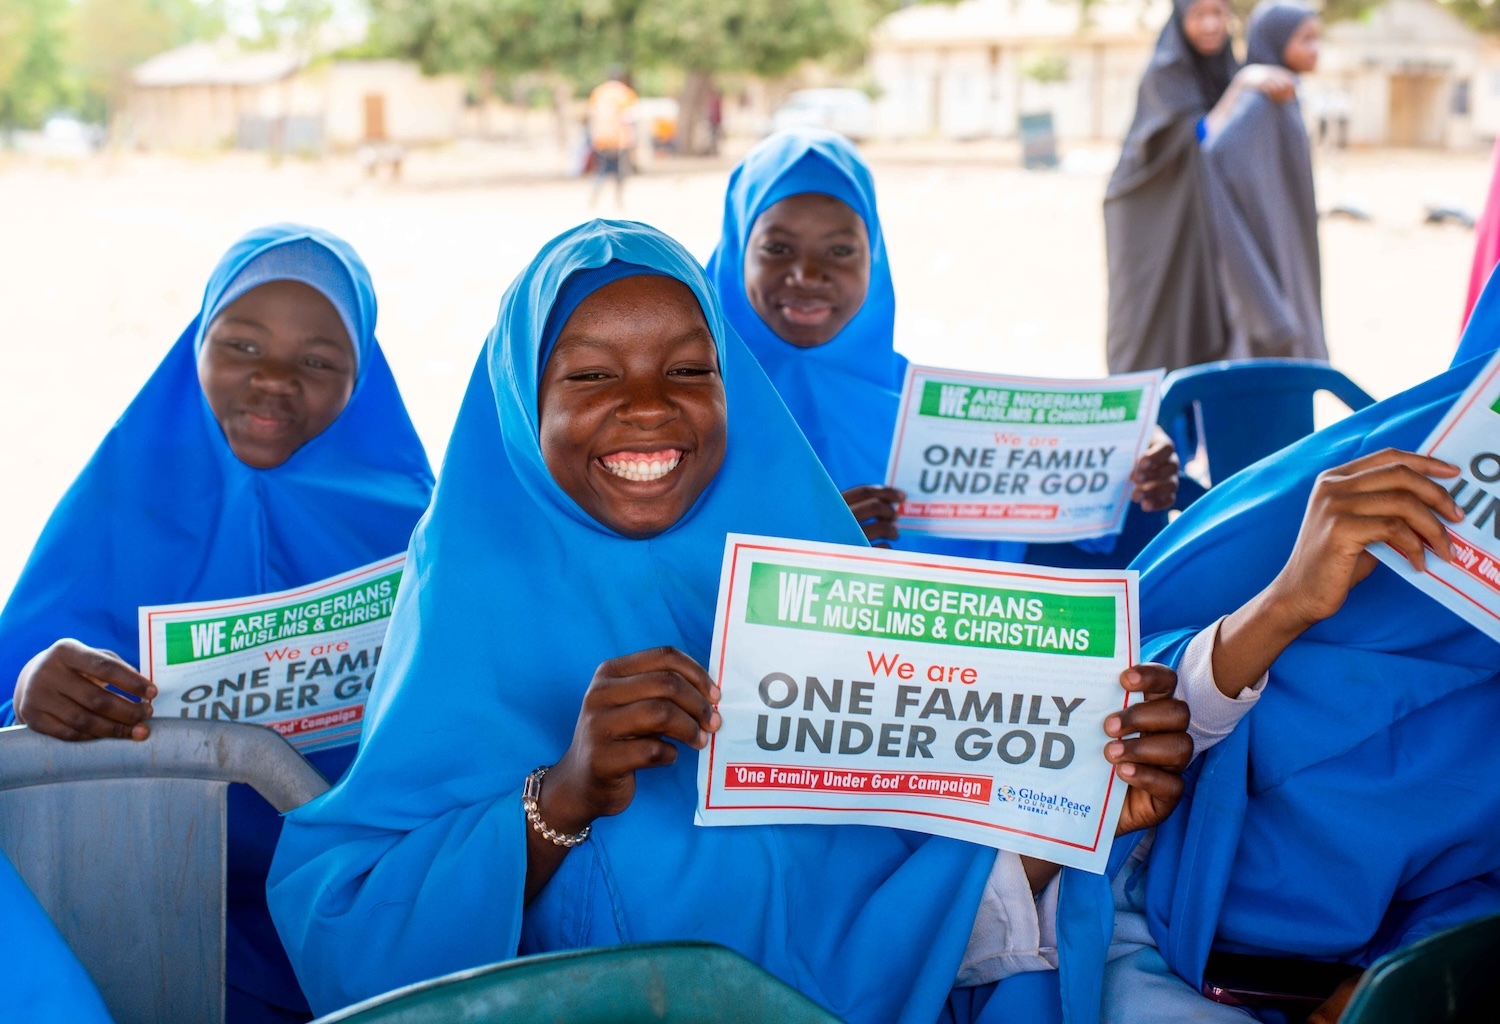 Group of smiling young students in blue hijabs holding signs promoting peacebuilding.